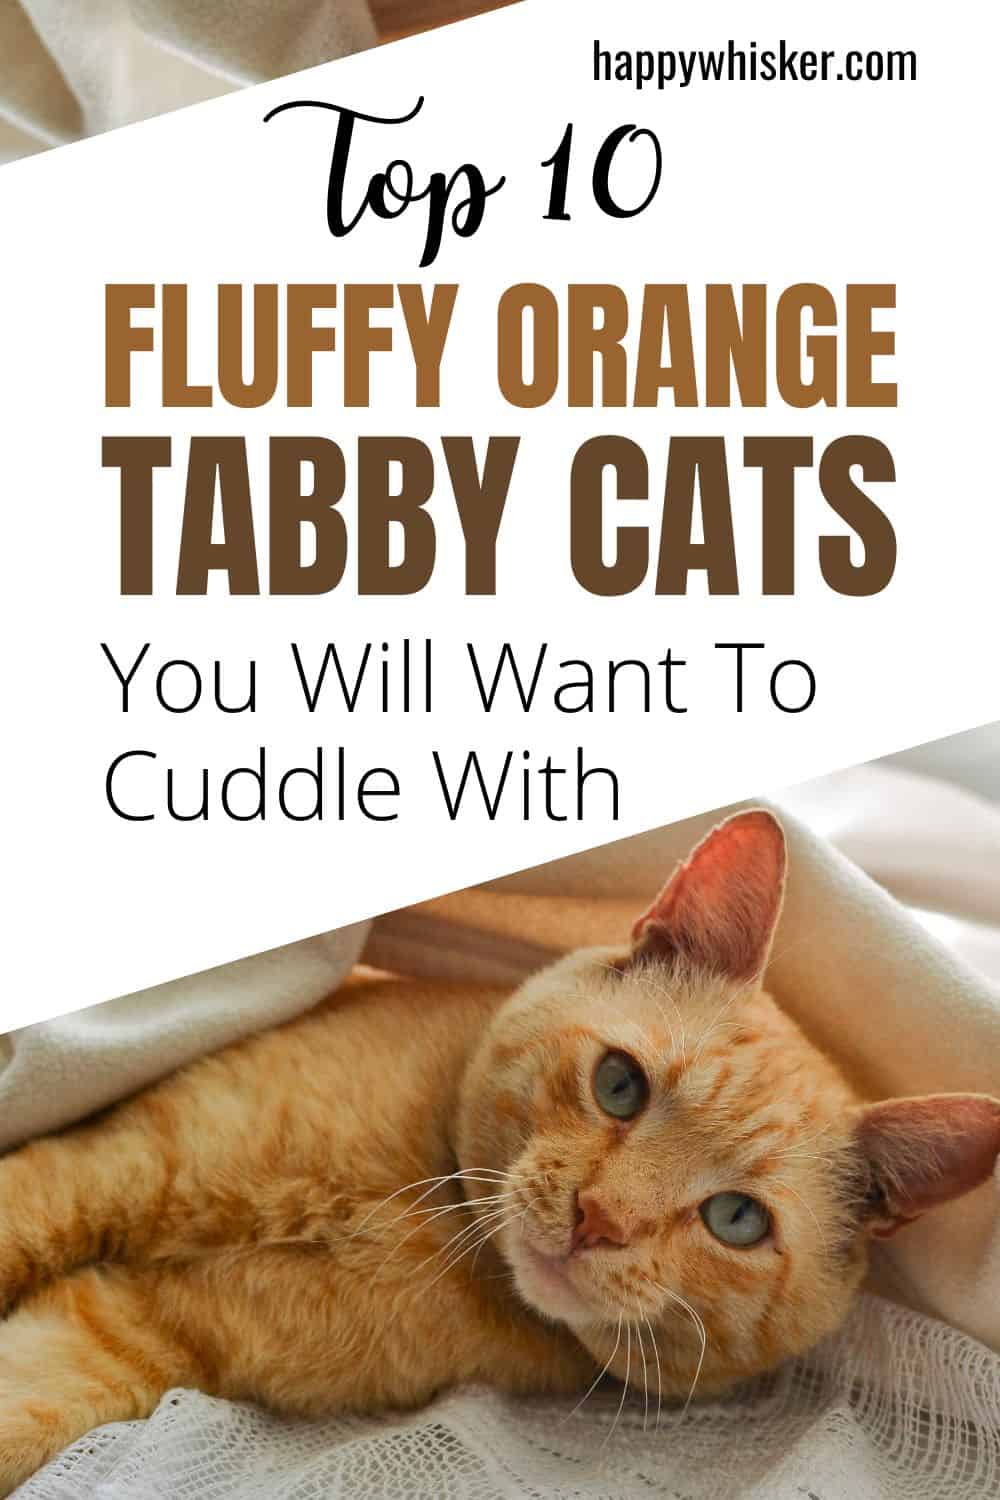 Top 10 Fluffy Orange Tabby Cats You Will Want To Cuddle With Pinterest